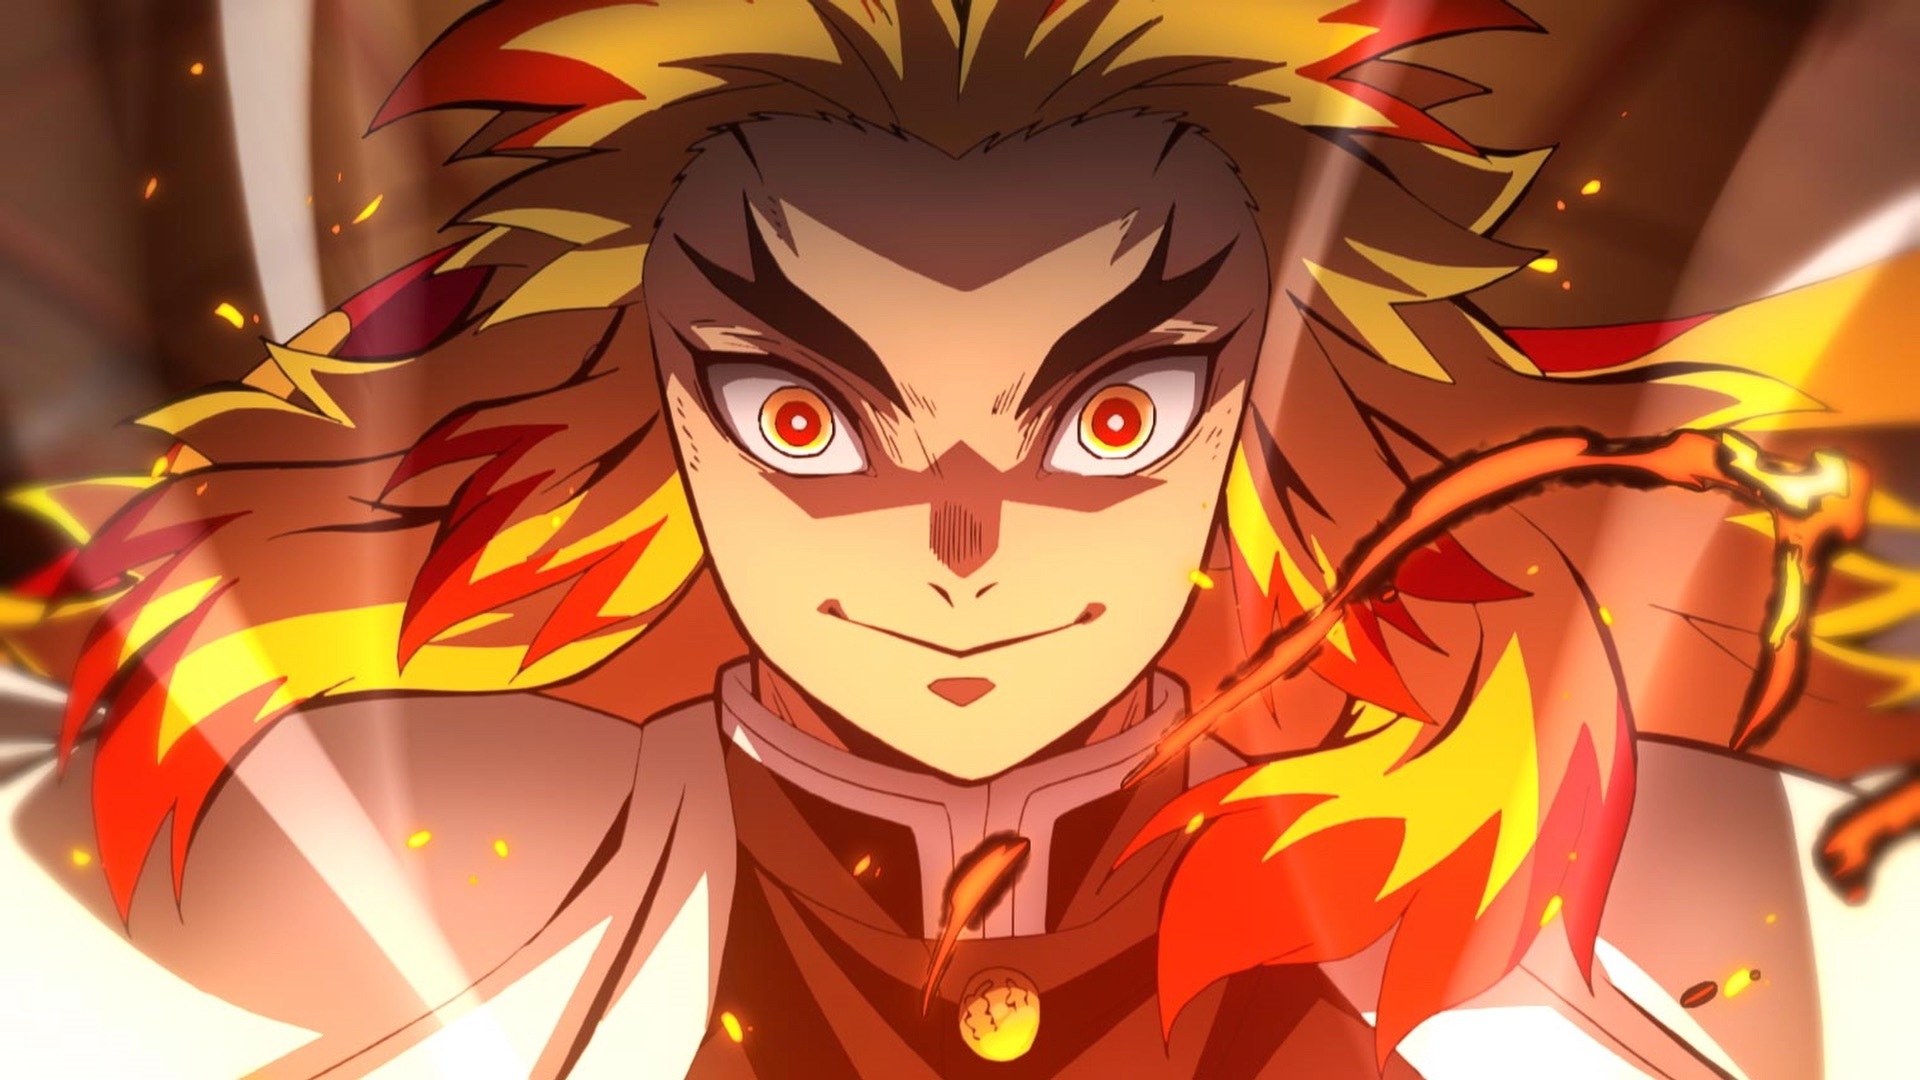 Demon Slayer: Mugen Train Review: A Wild Ride for Fans